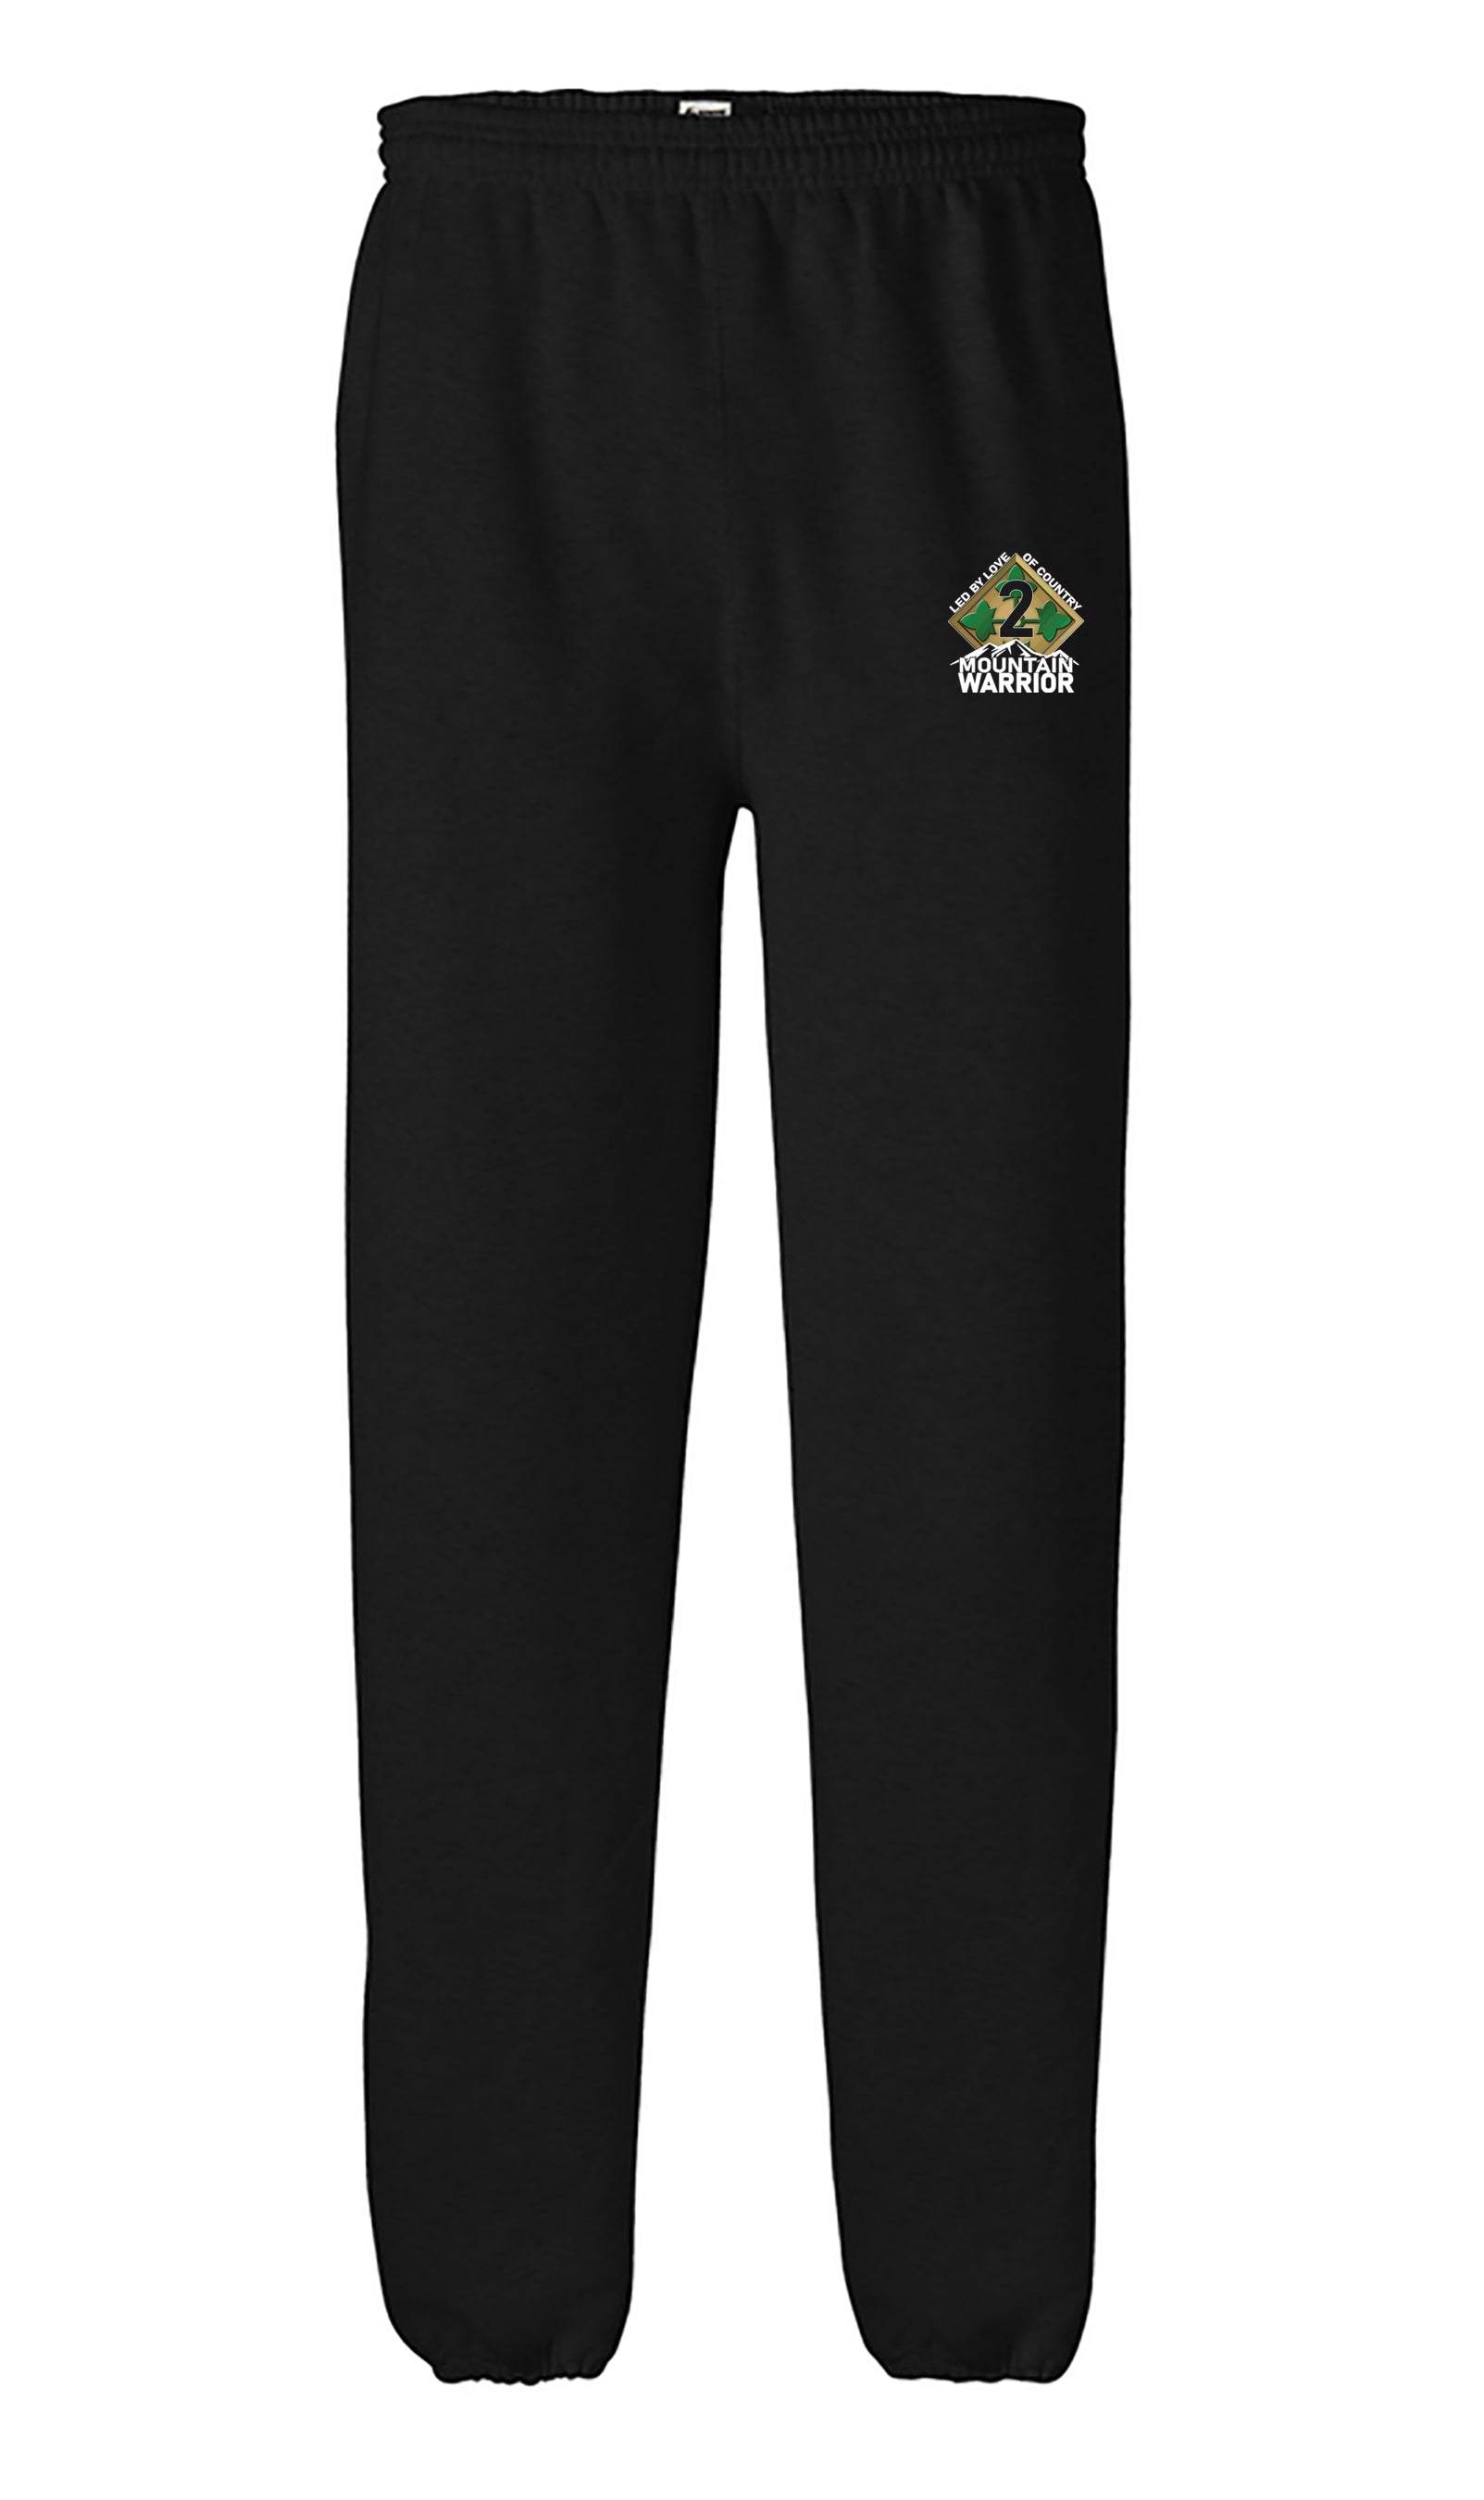 Unisex Sweatpants. These Sweatpants are NOT Approved for PT. - S / No Call  Sign / No Tab